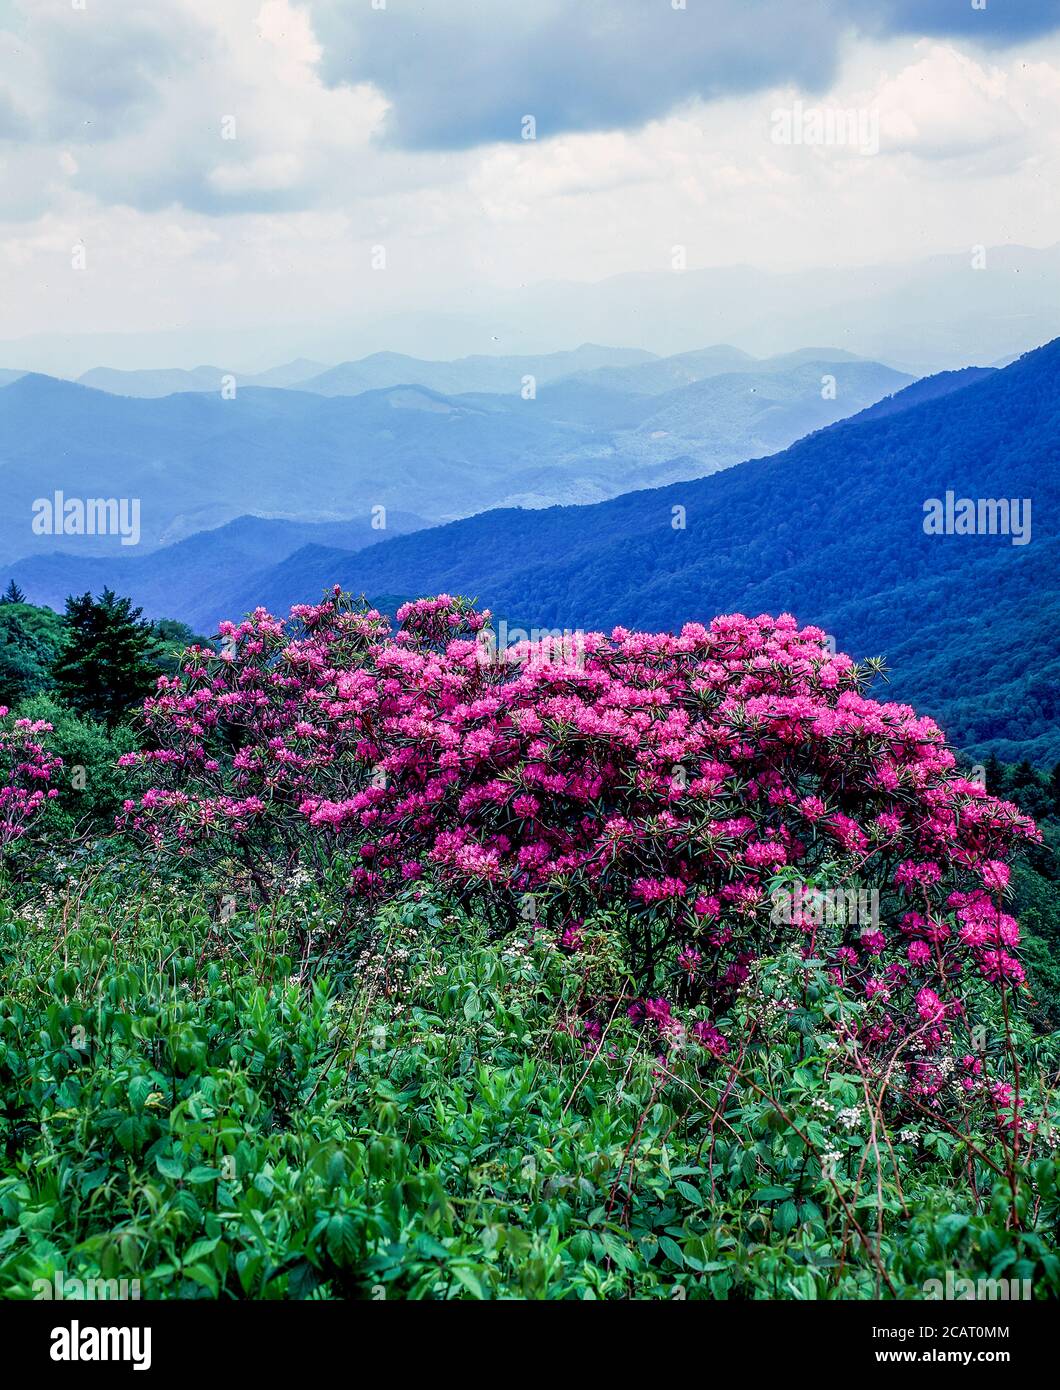 Flame azalea blooming in the mountains along the Blue Ridge Parkway in North Carolina in the United States Stock Photo